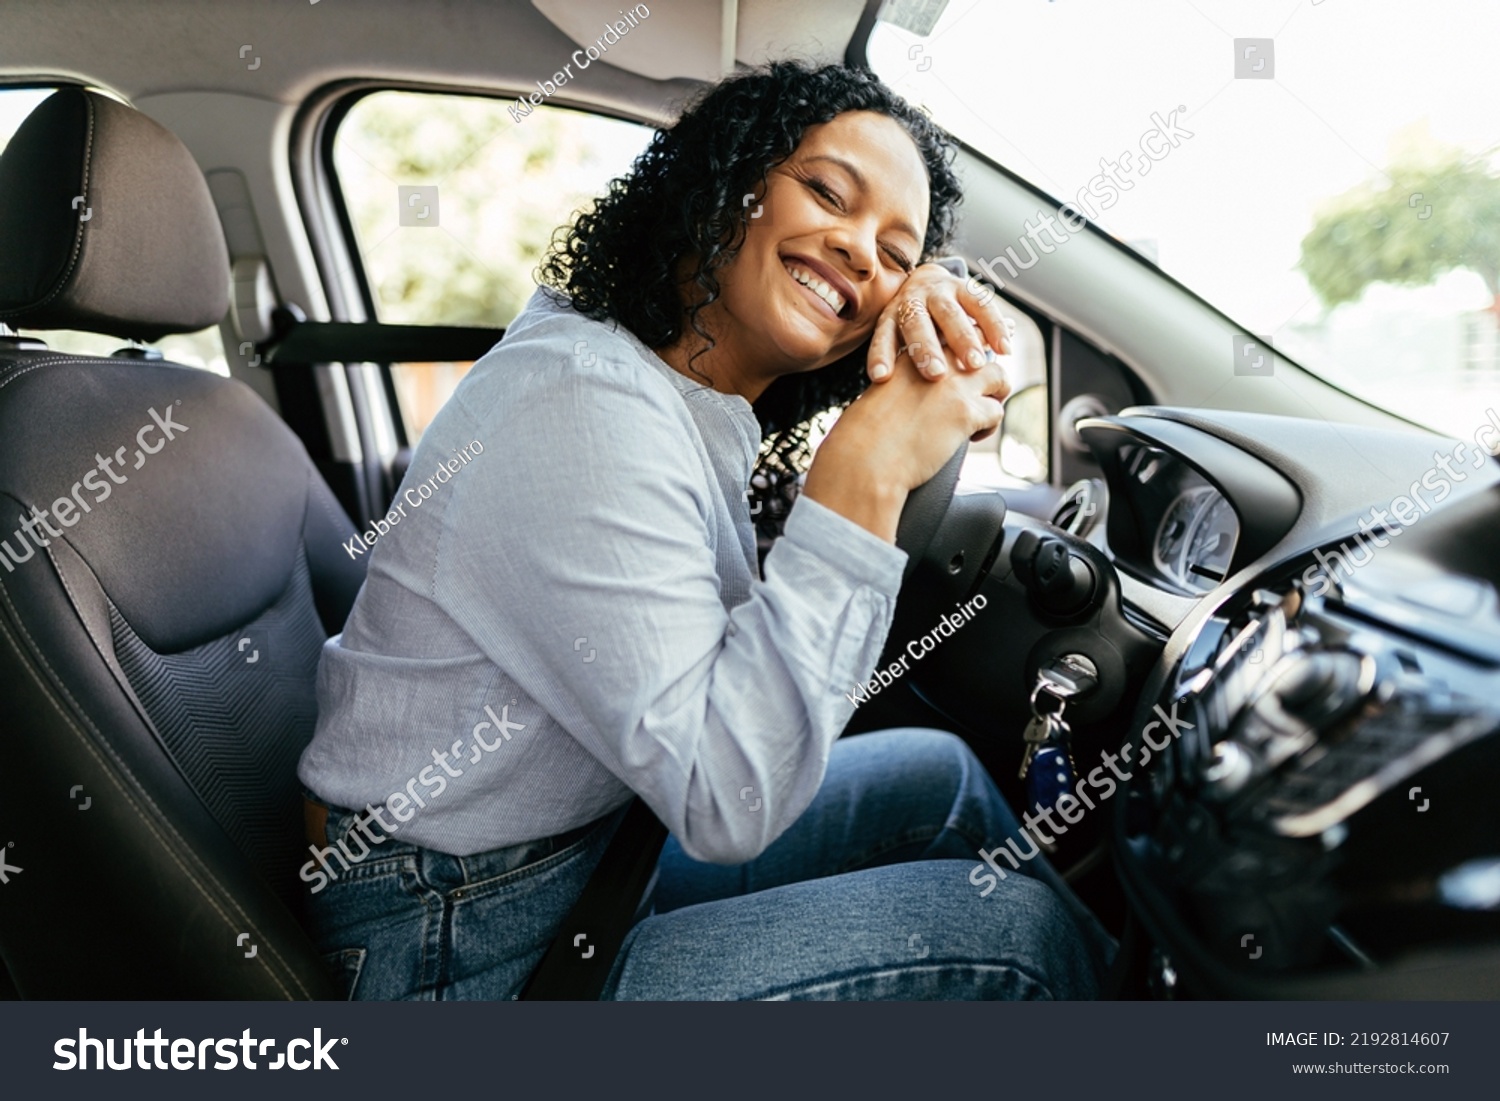 Young and cheerful woman enjoying new car hugging steering wheel sitting inside. Woman driving a new car. #2192814607